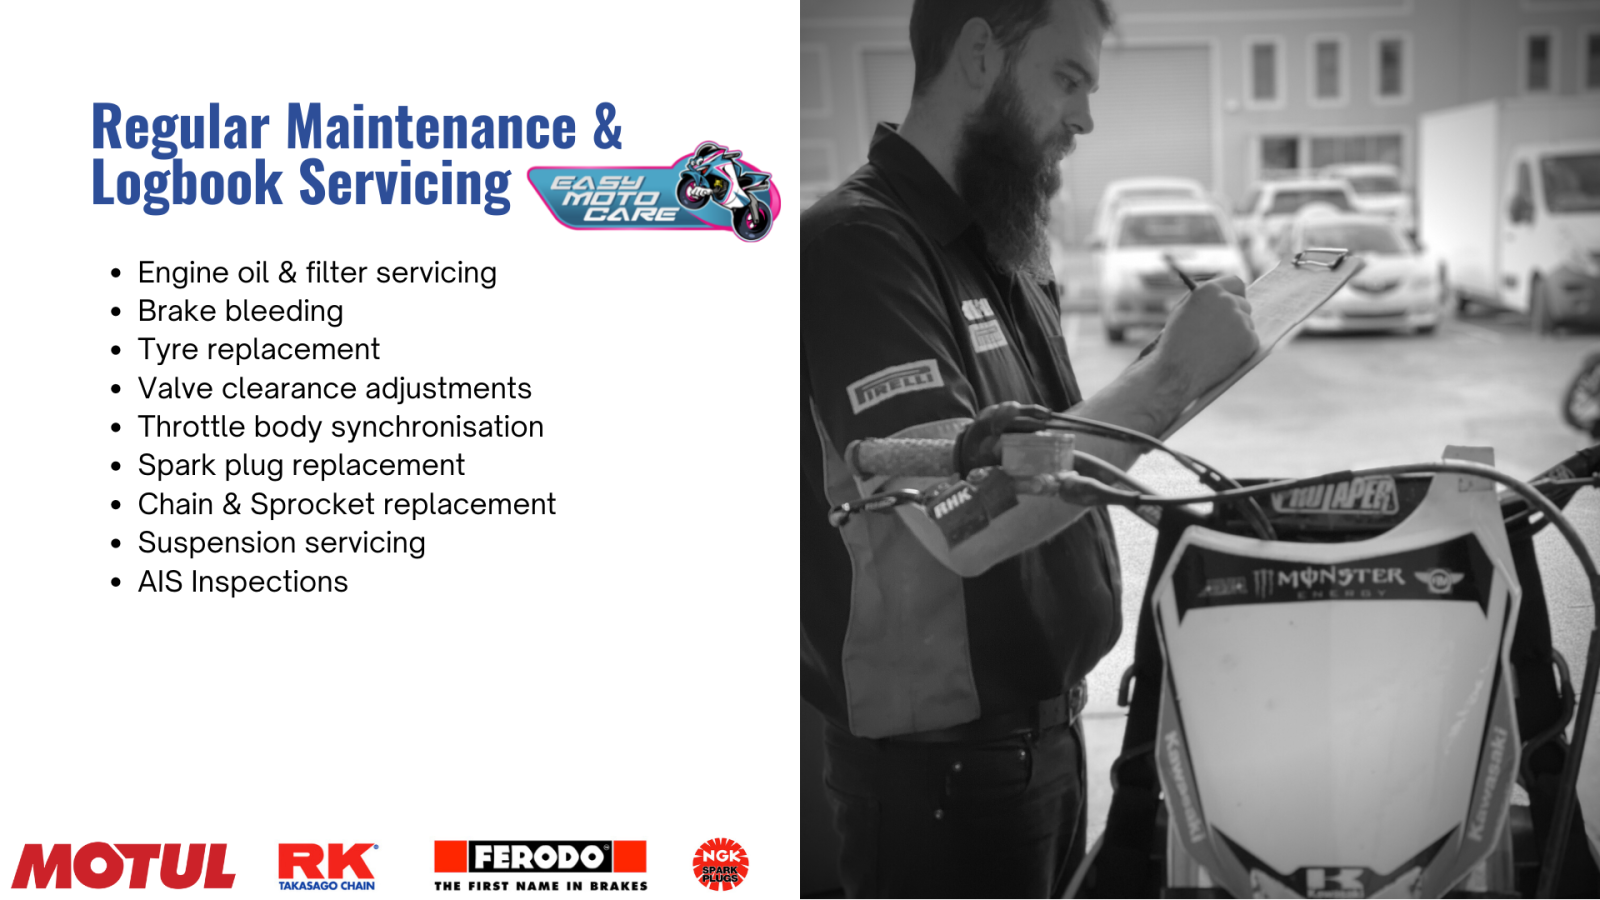 Regular Maintenance & Logbook Servicing. Engine oil & filter servicing Brake bleeding Tyre replacement Valve clearance adjustments Throttle body synchronisation Spark plug replacement Chain & Sprocket replacement Suspension servicing AIS Inspections